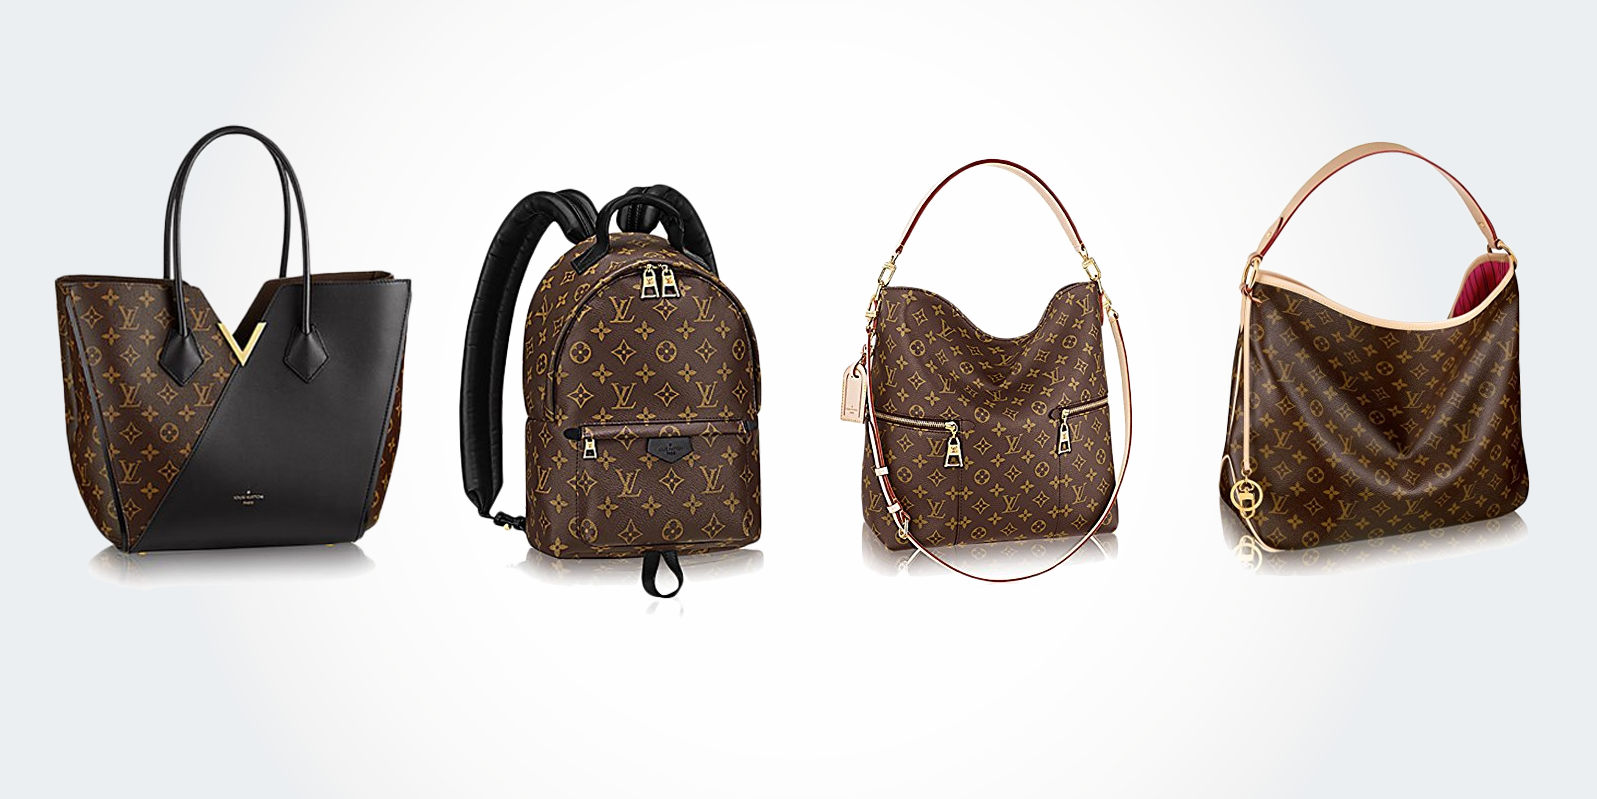 8 Best Louis Vuitton Bag & Handbags for Everyday Use | Bestlyy 2020 - Best Products, Curated by ...